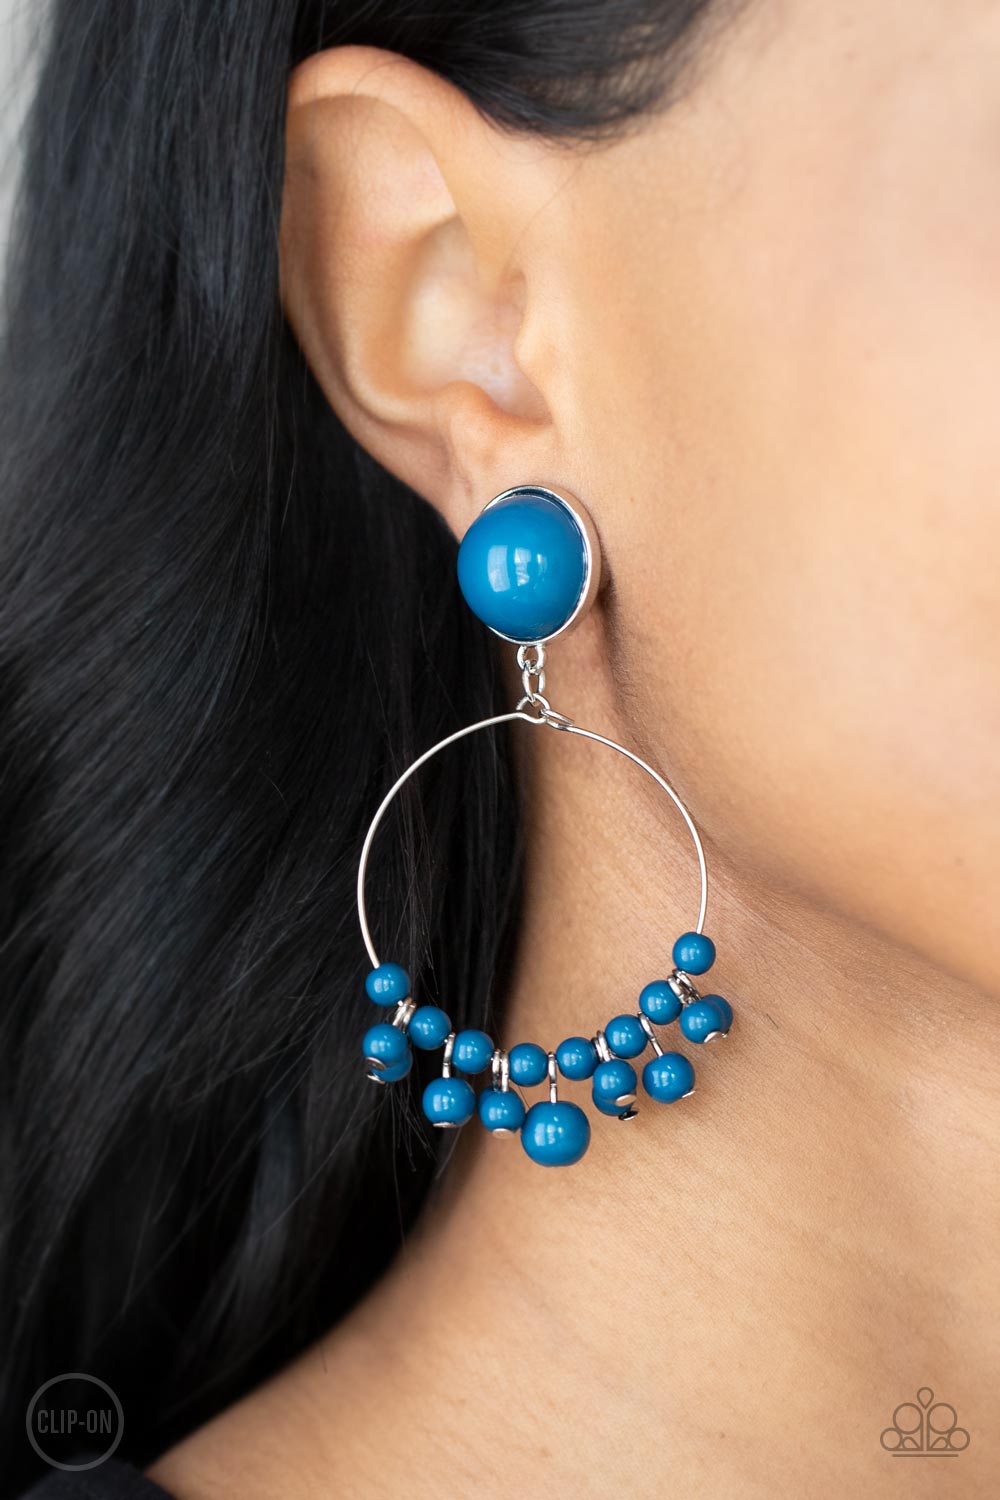 Cabaret Charm Blue Clip-On Earring - Paparazzi Accessories  Shiny blue beads are threaded along a dainty wire hoop that attaches to an oversized blue beaded fitting, creating a bubbly fringe. Earring attaches to a standard clip-on fitting.  Sold as one pair of clip-on earrings.